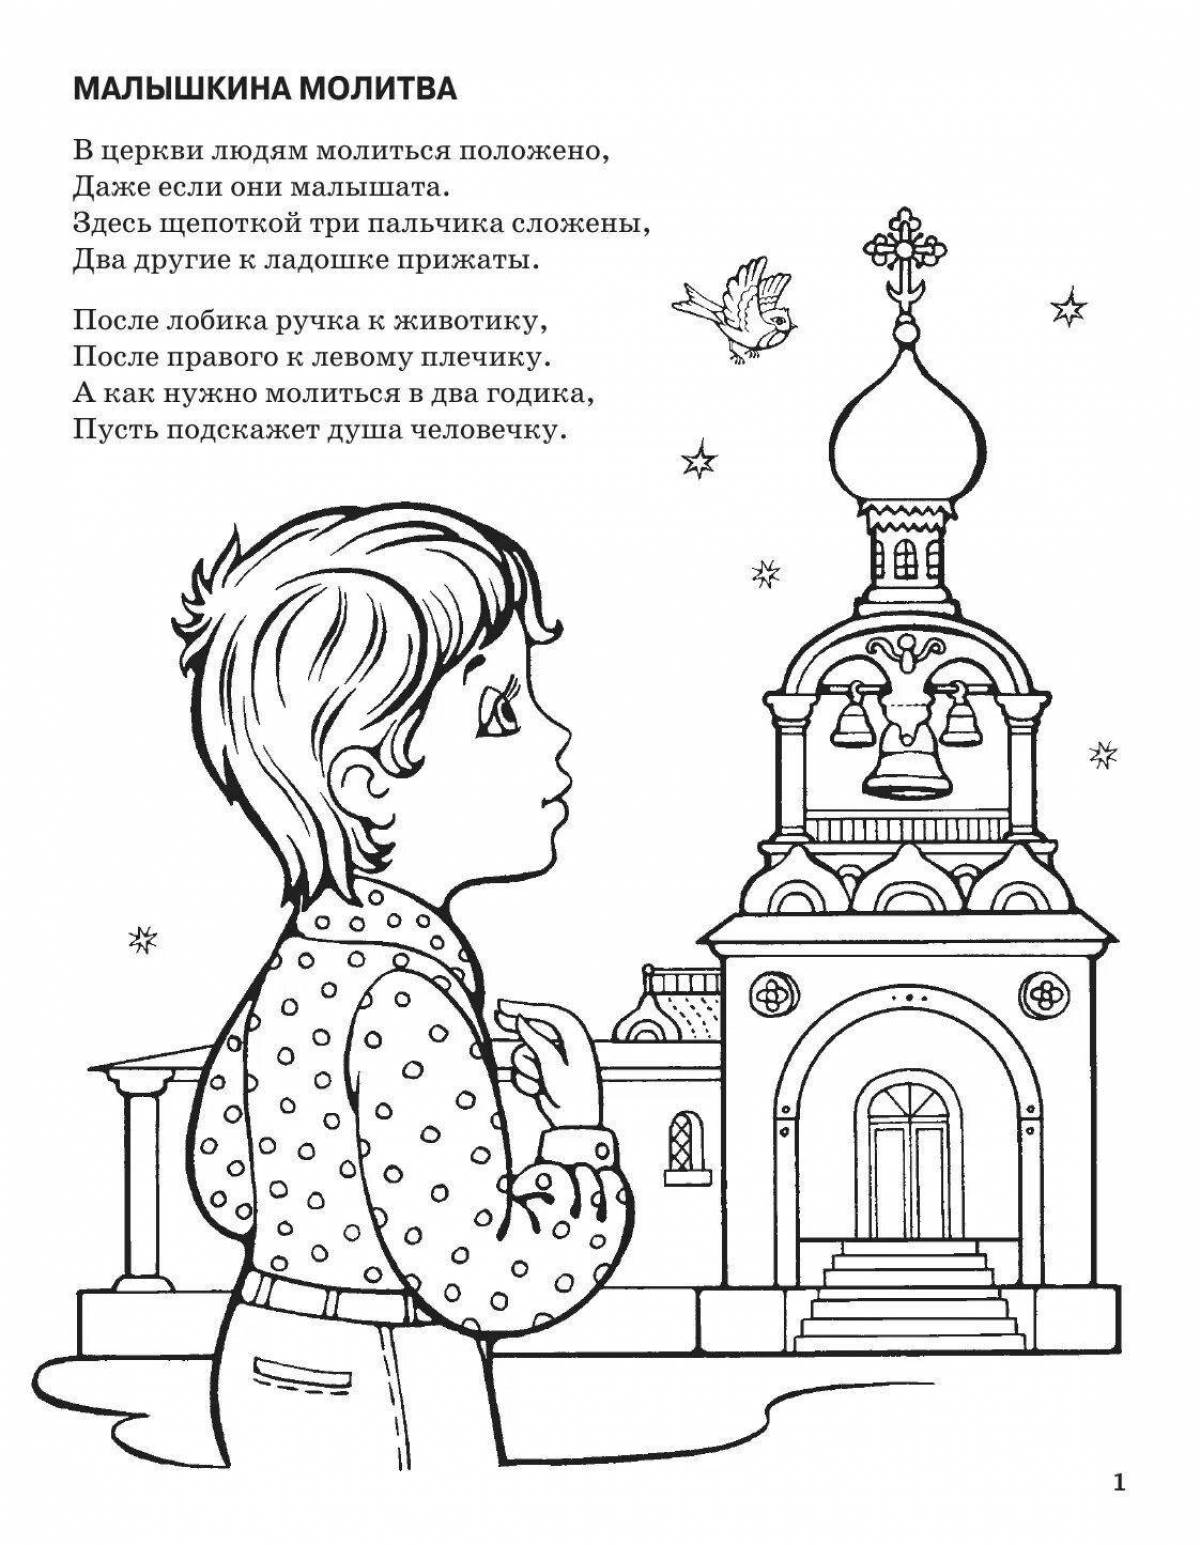 Glittering church coloring page